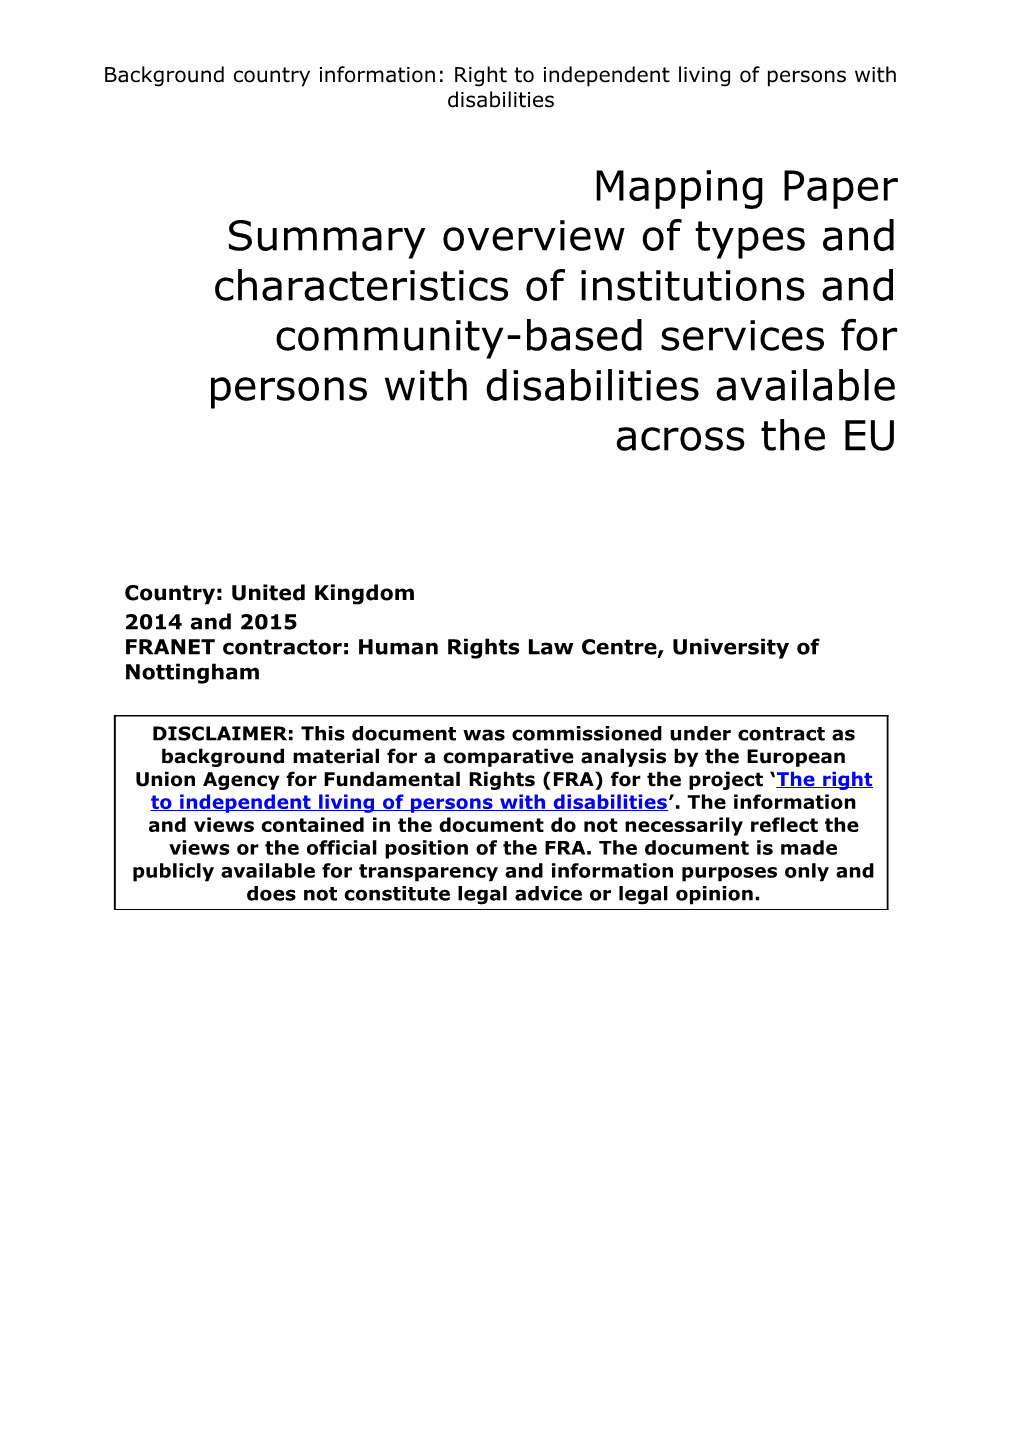 Summary Overview of Types and Characteristics of Institutions and Community-Based Services s1